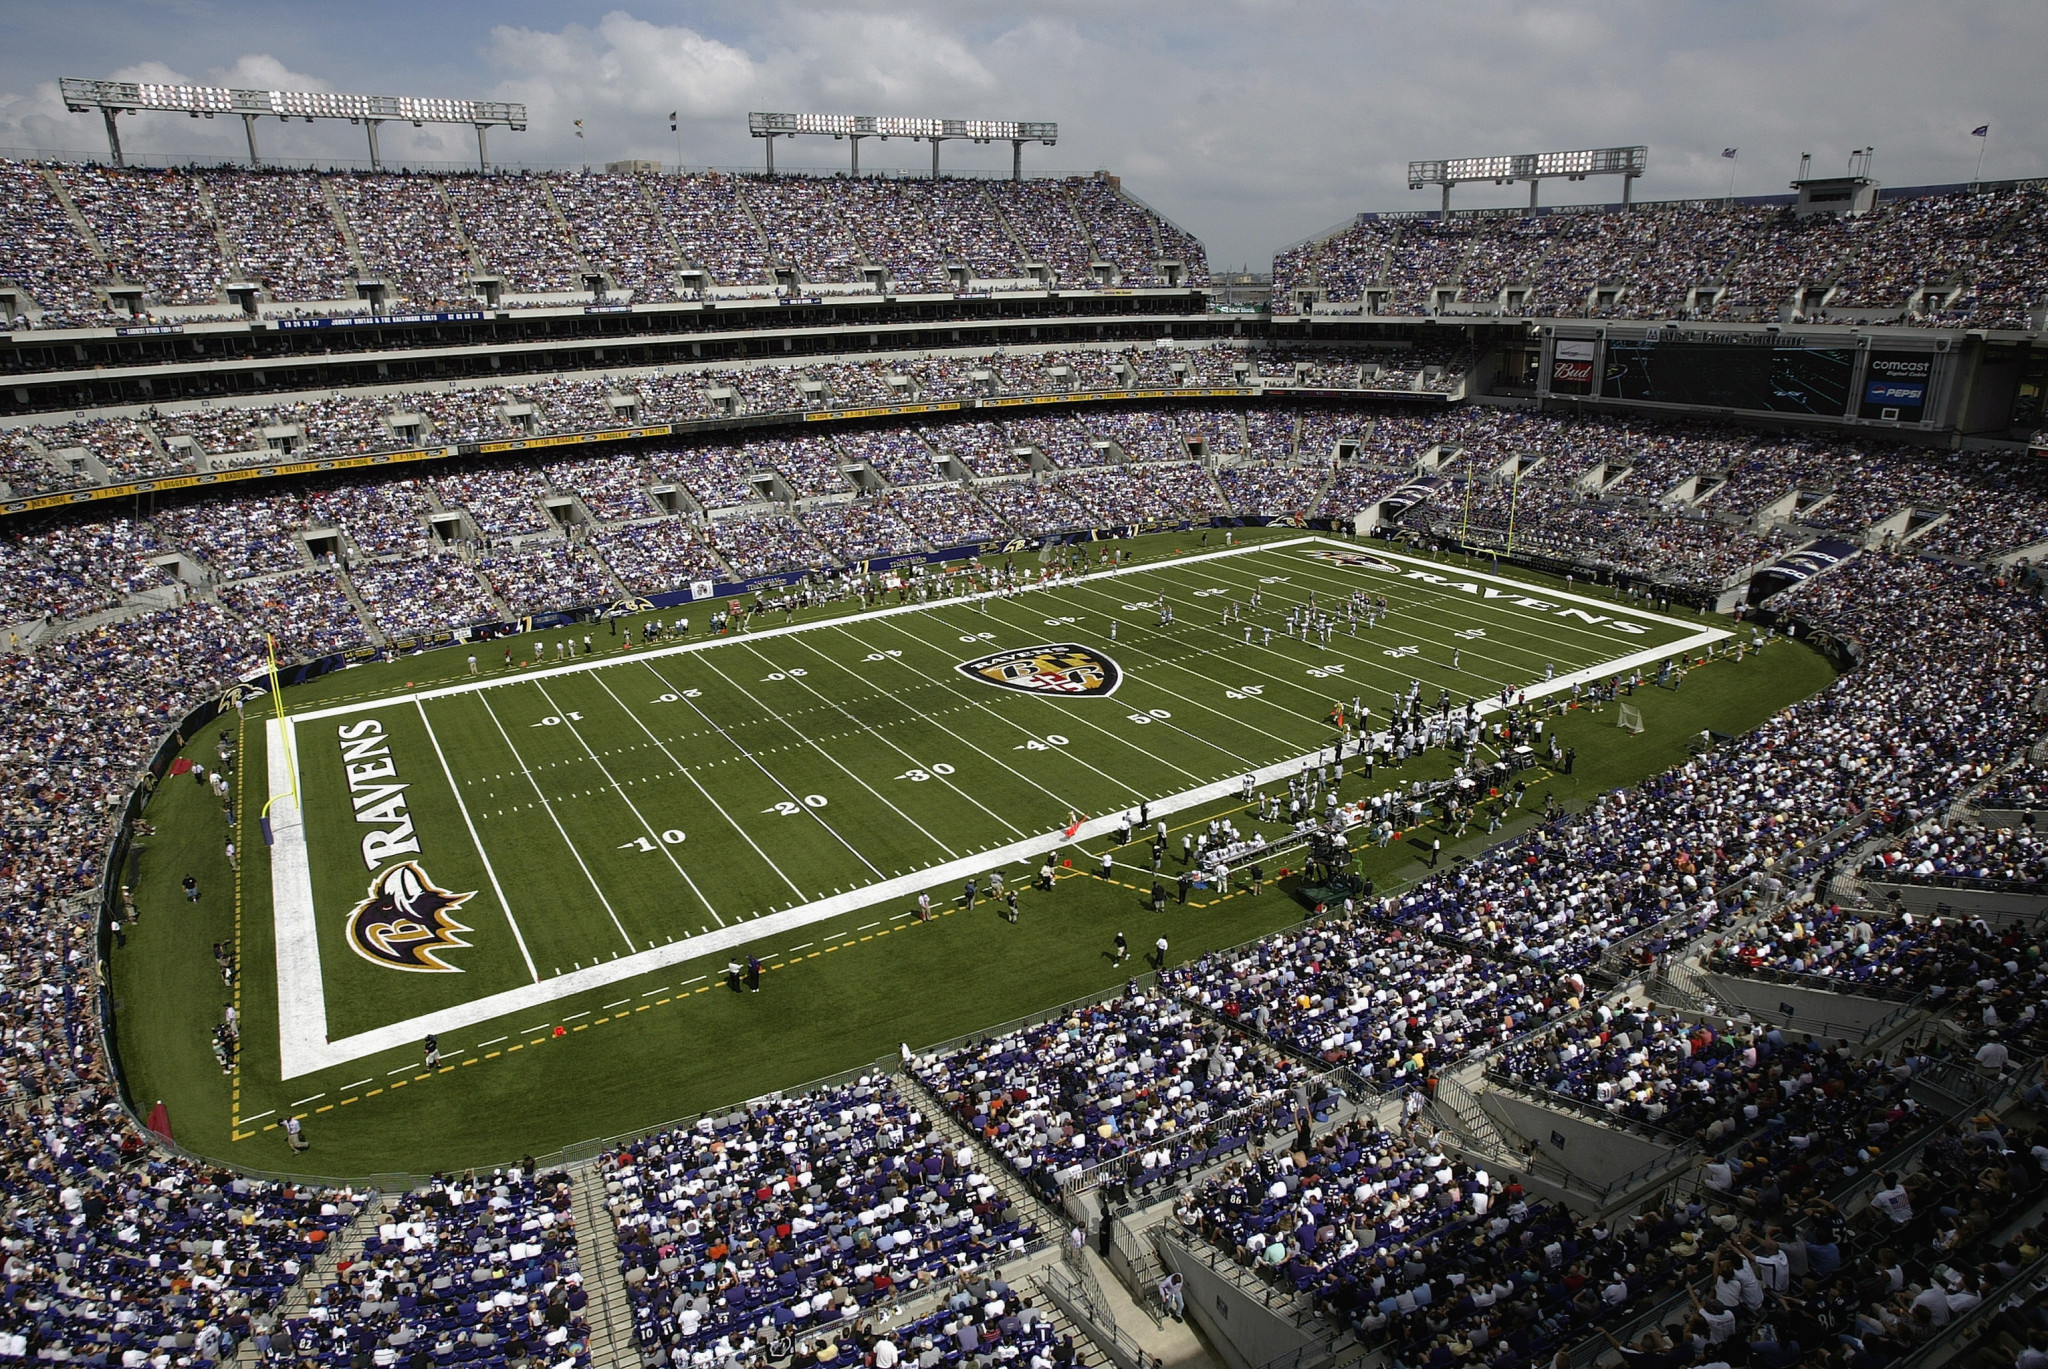 M&T Bank Stadium in Baltimore, Maryland is home to the NFL's Baltimore Ravens ©Getty Images